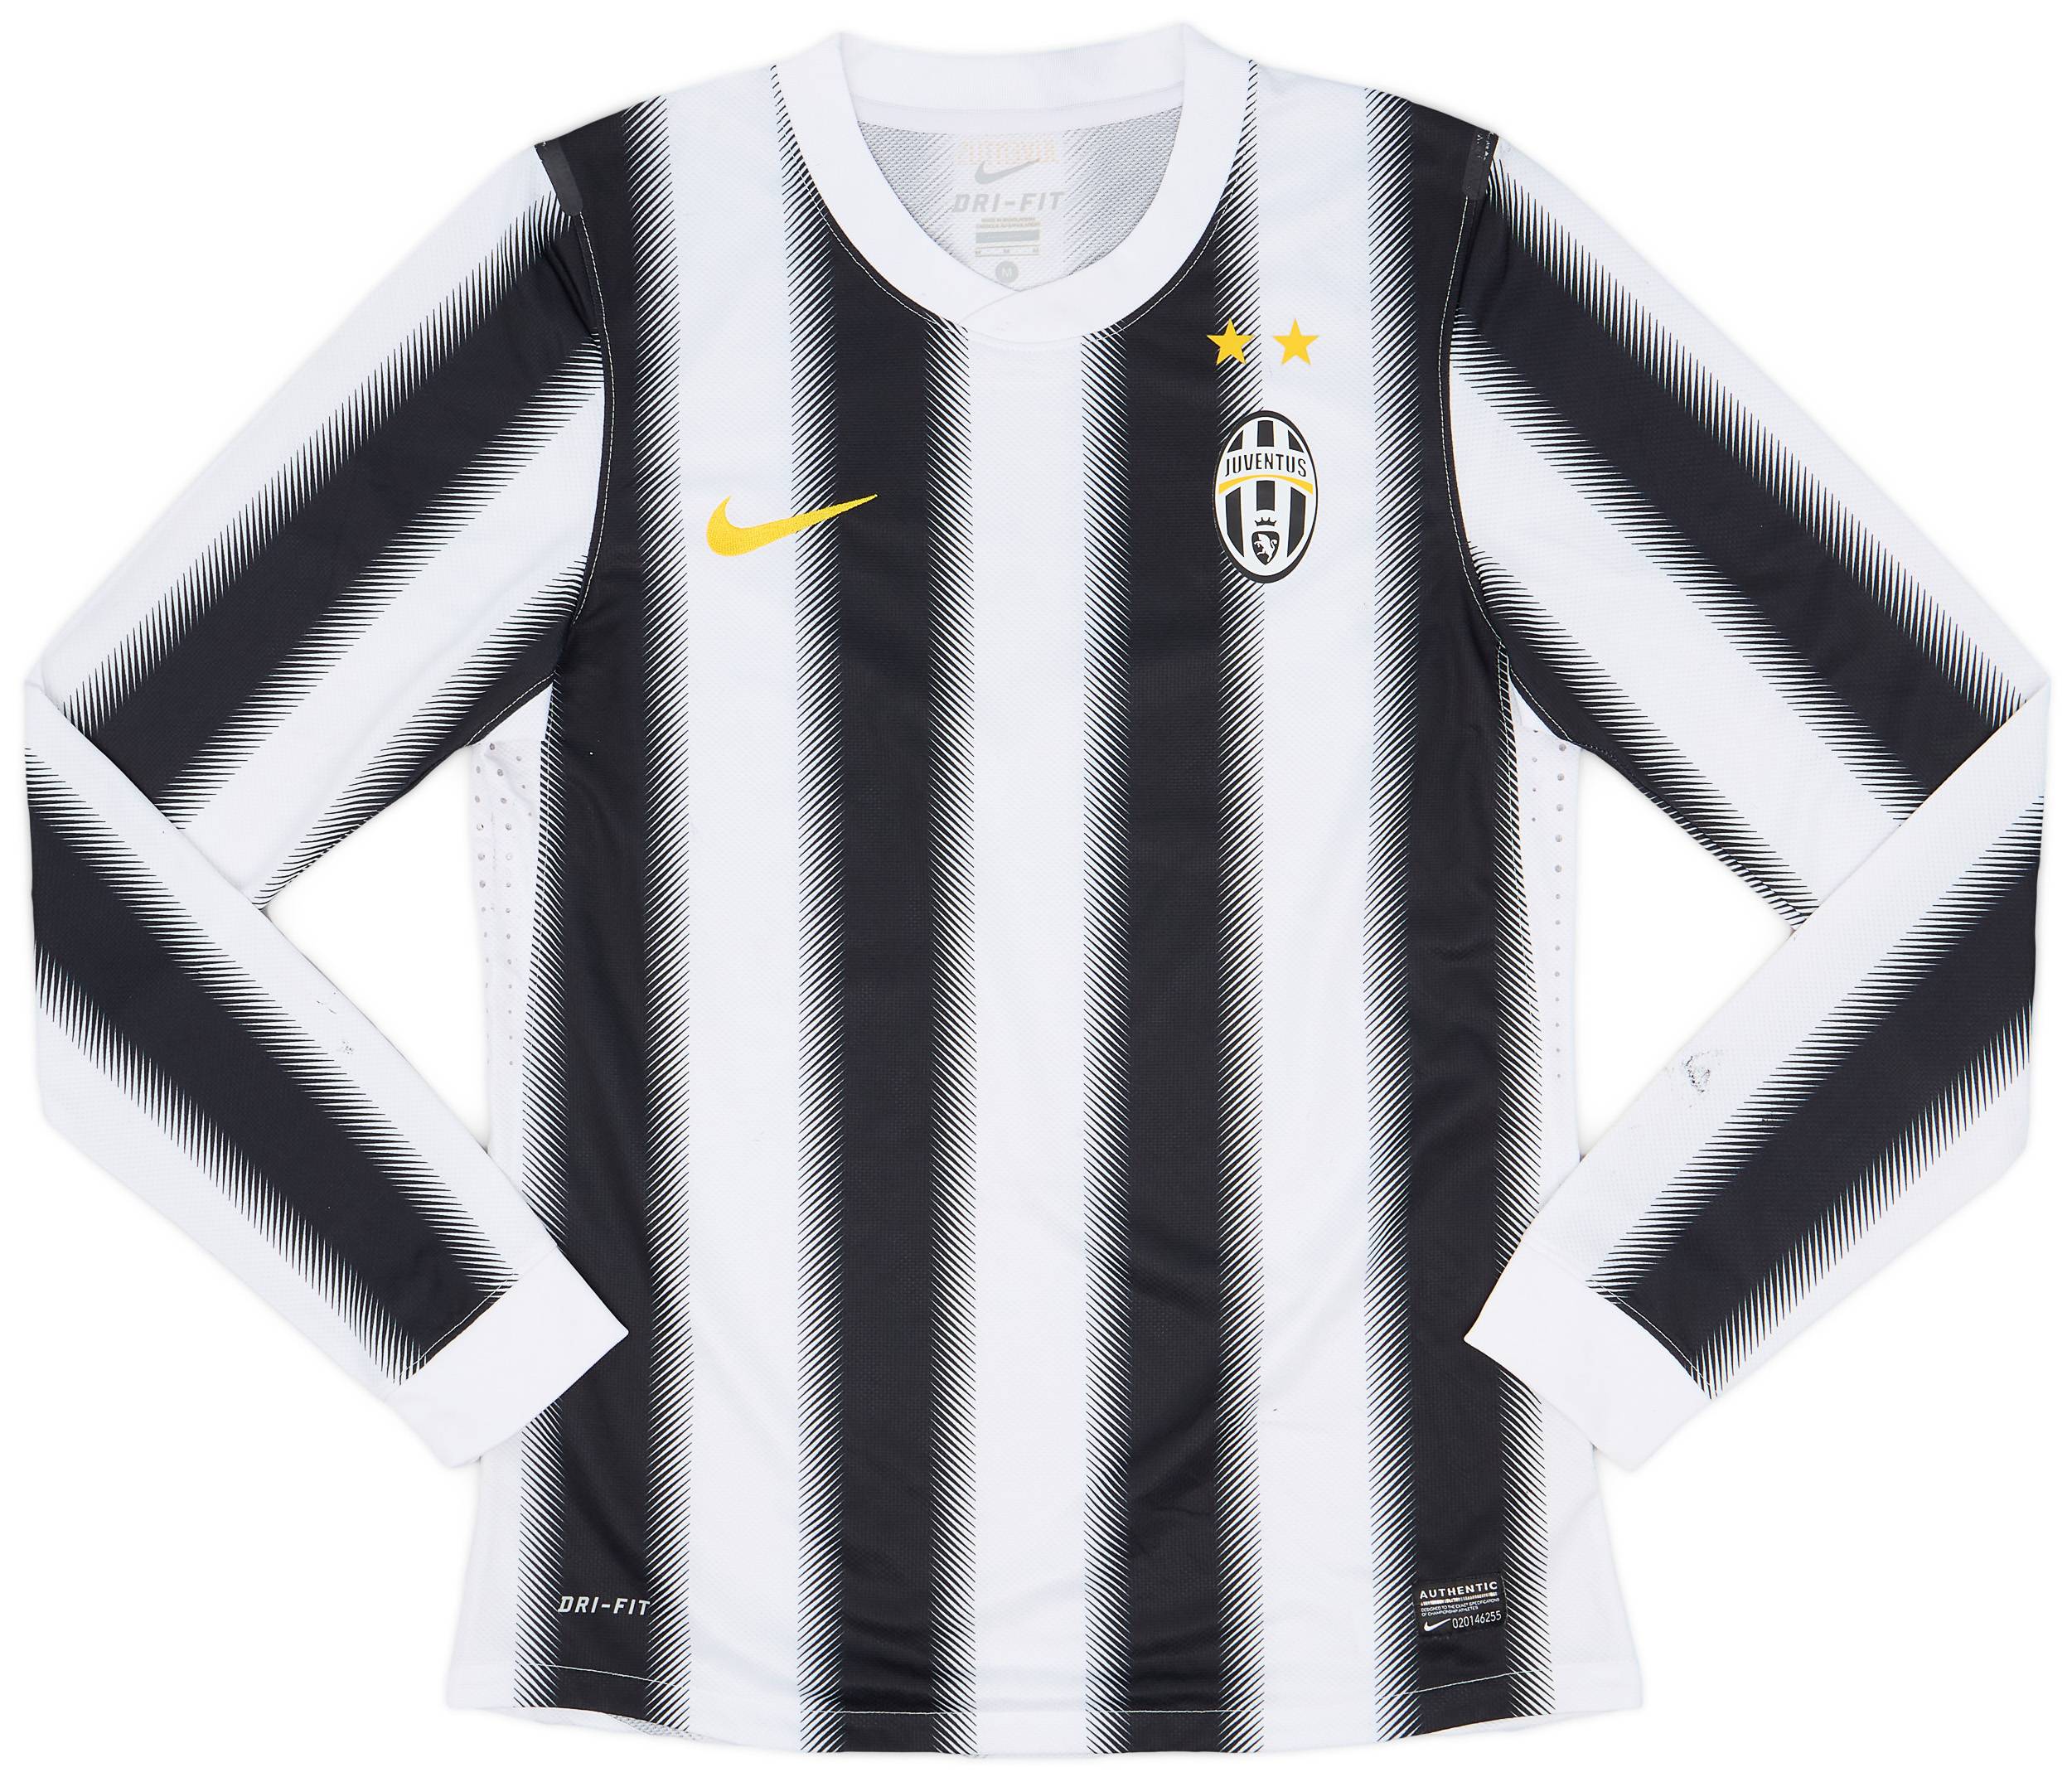 2011-12 Juventus Player Issue Home L/S Shirt - 6/10 - (M)